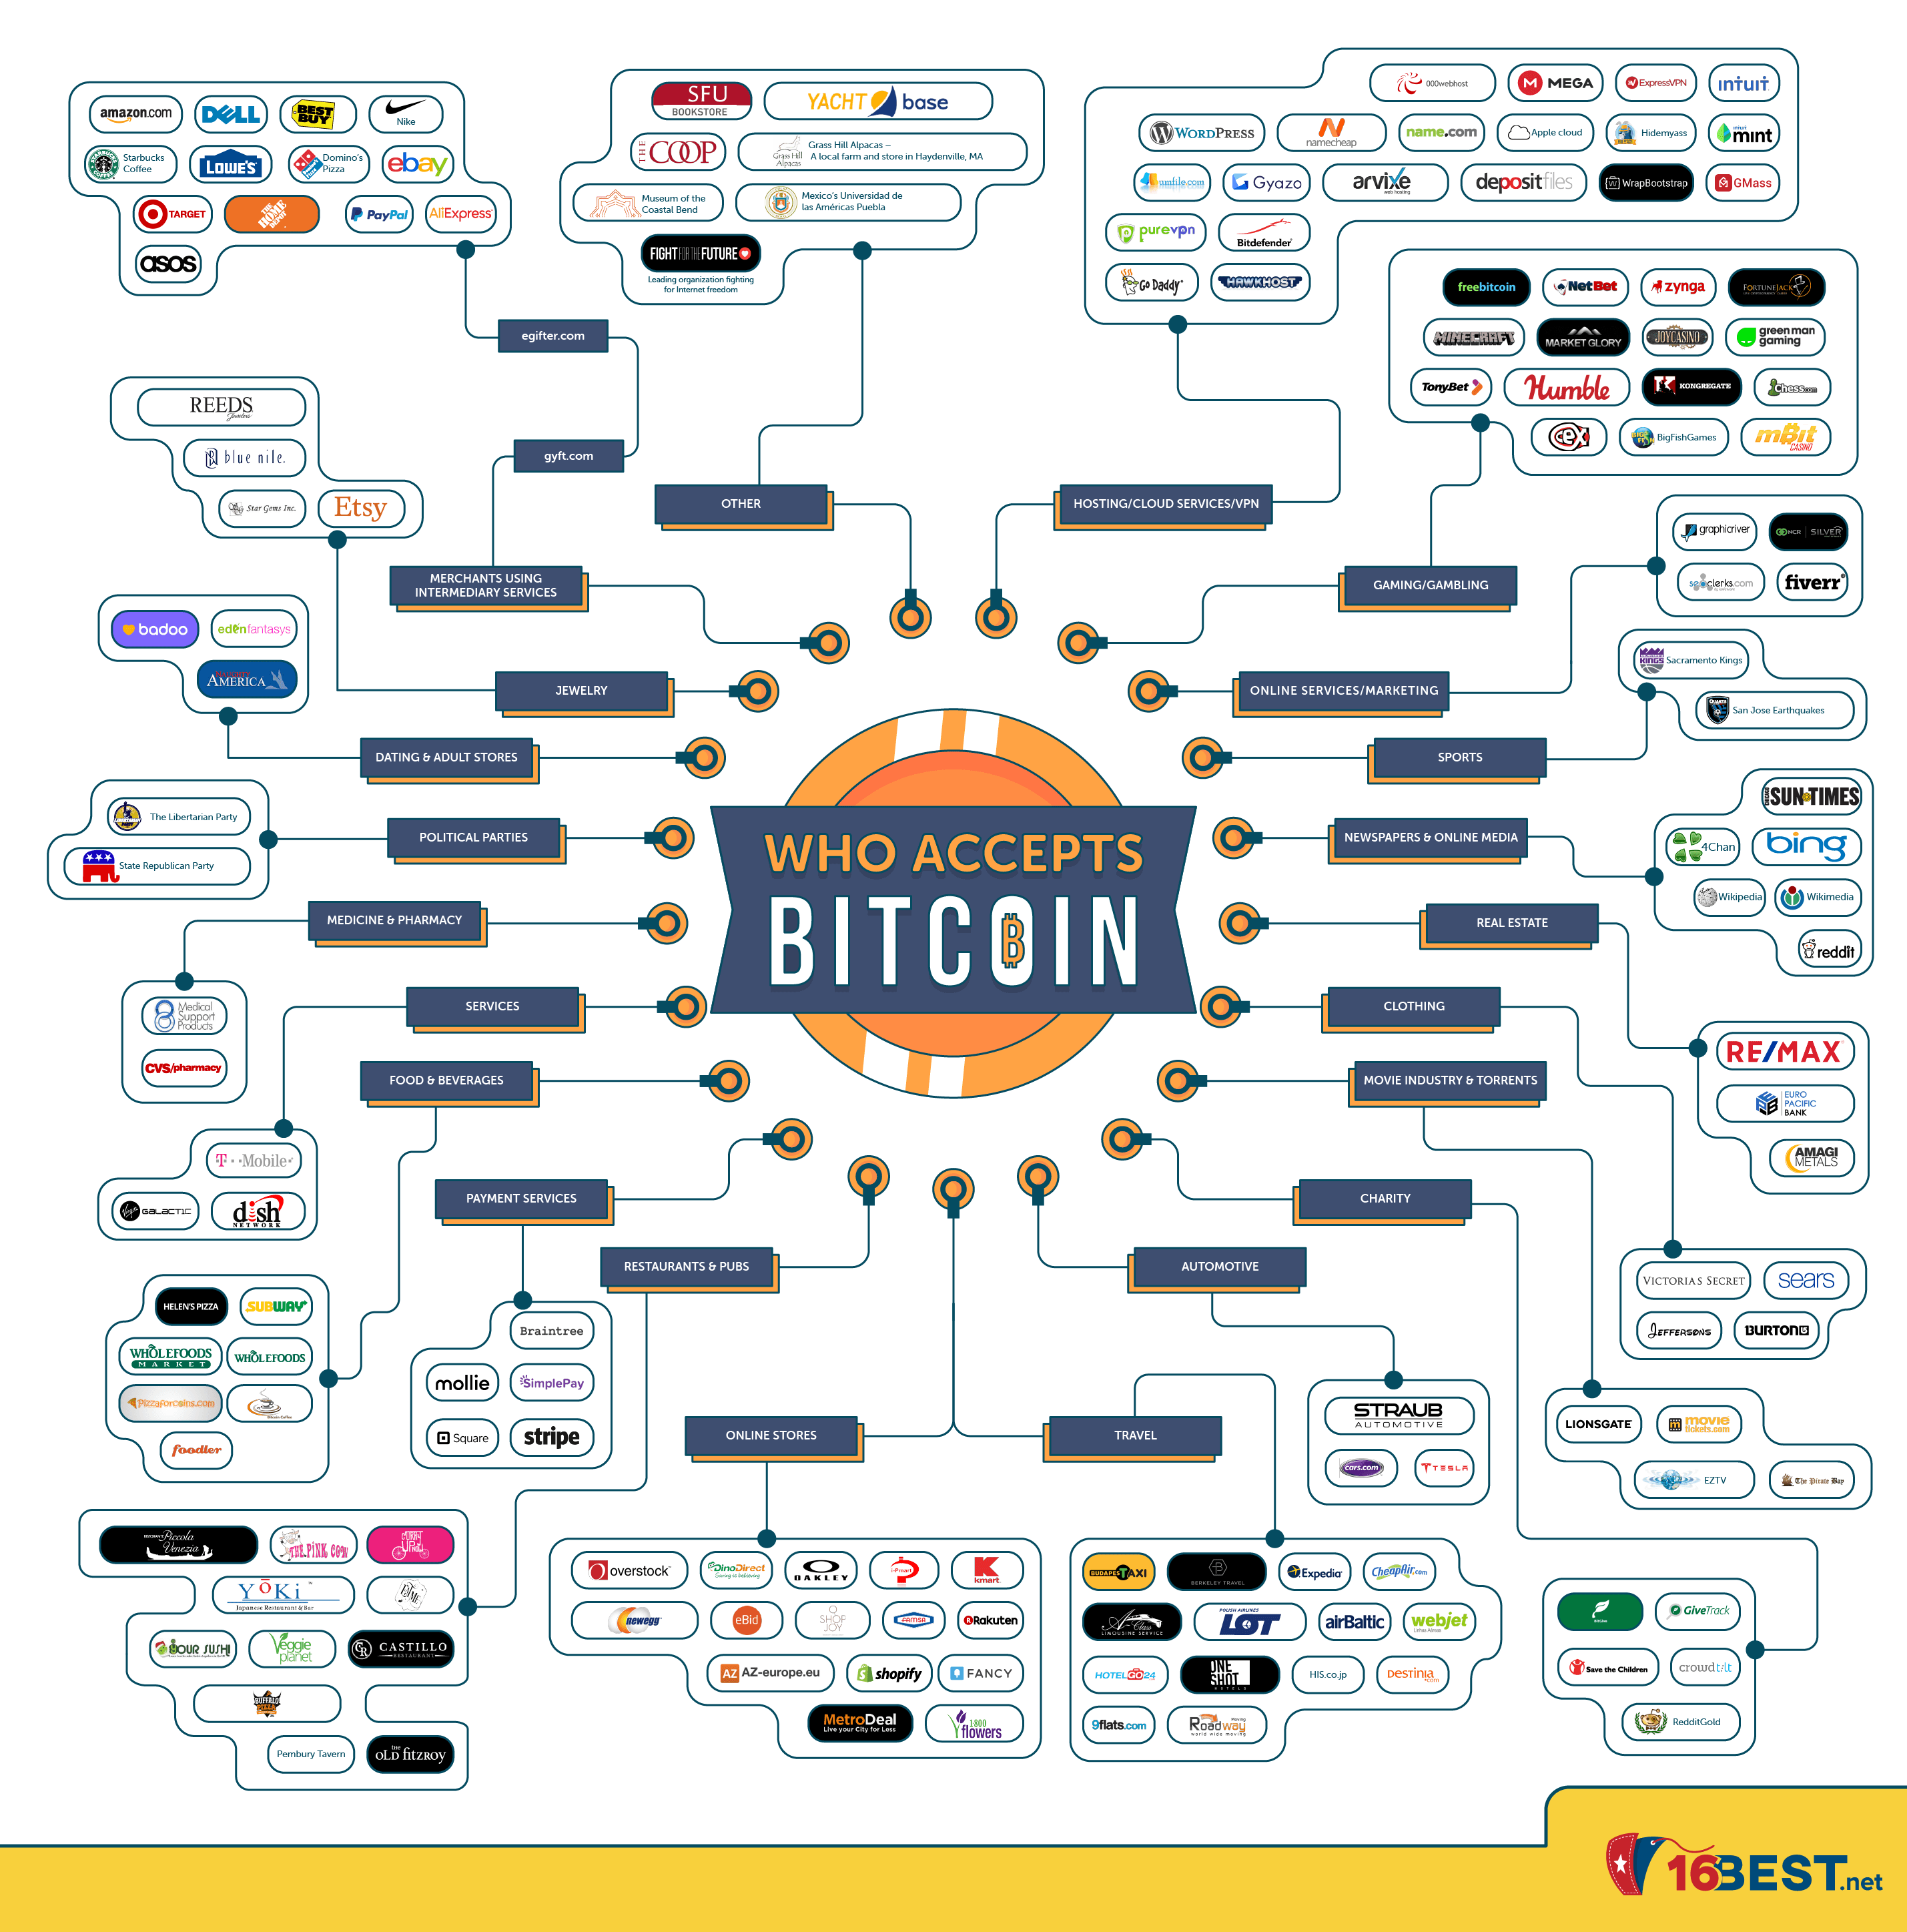 + companies and stores that accept Bitcoin for payment in 